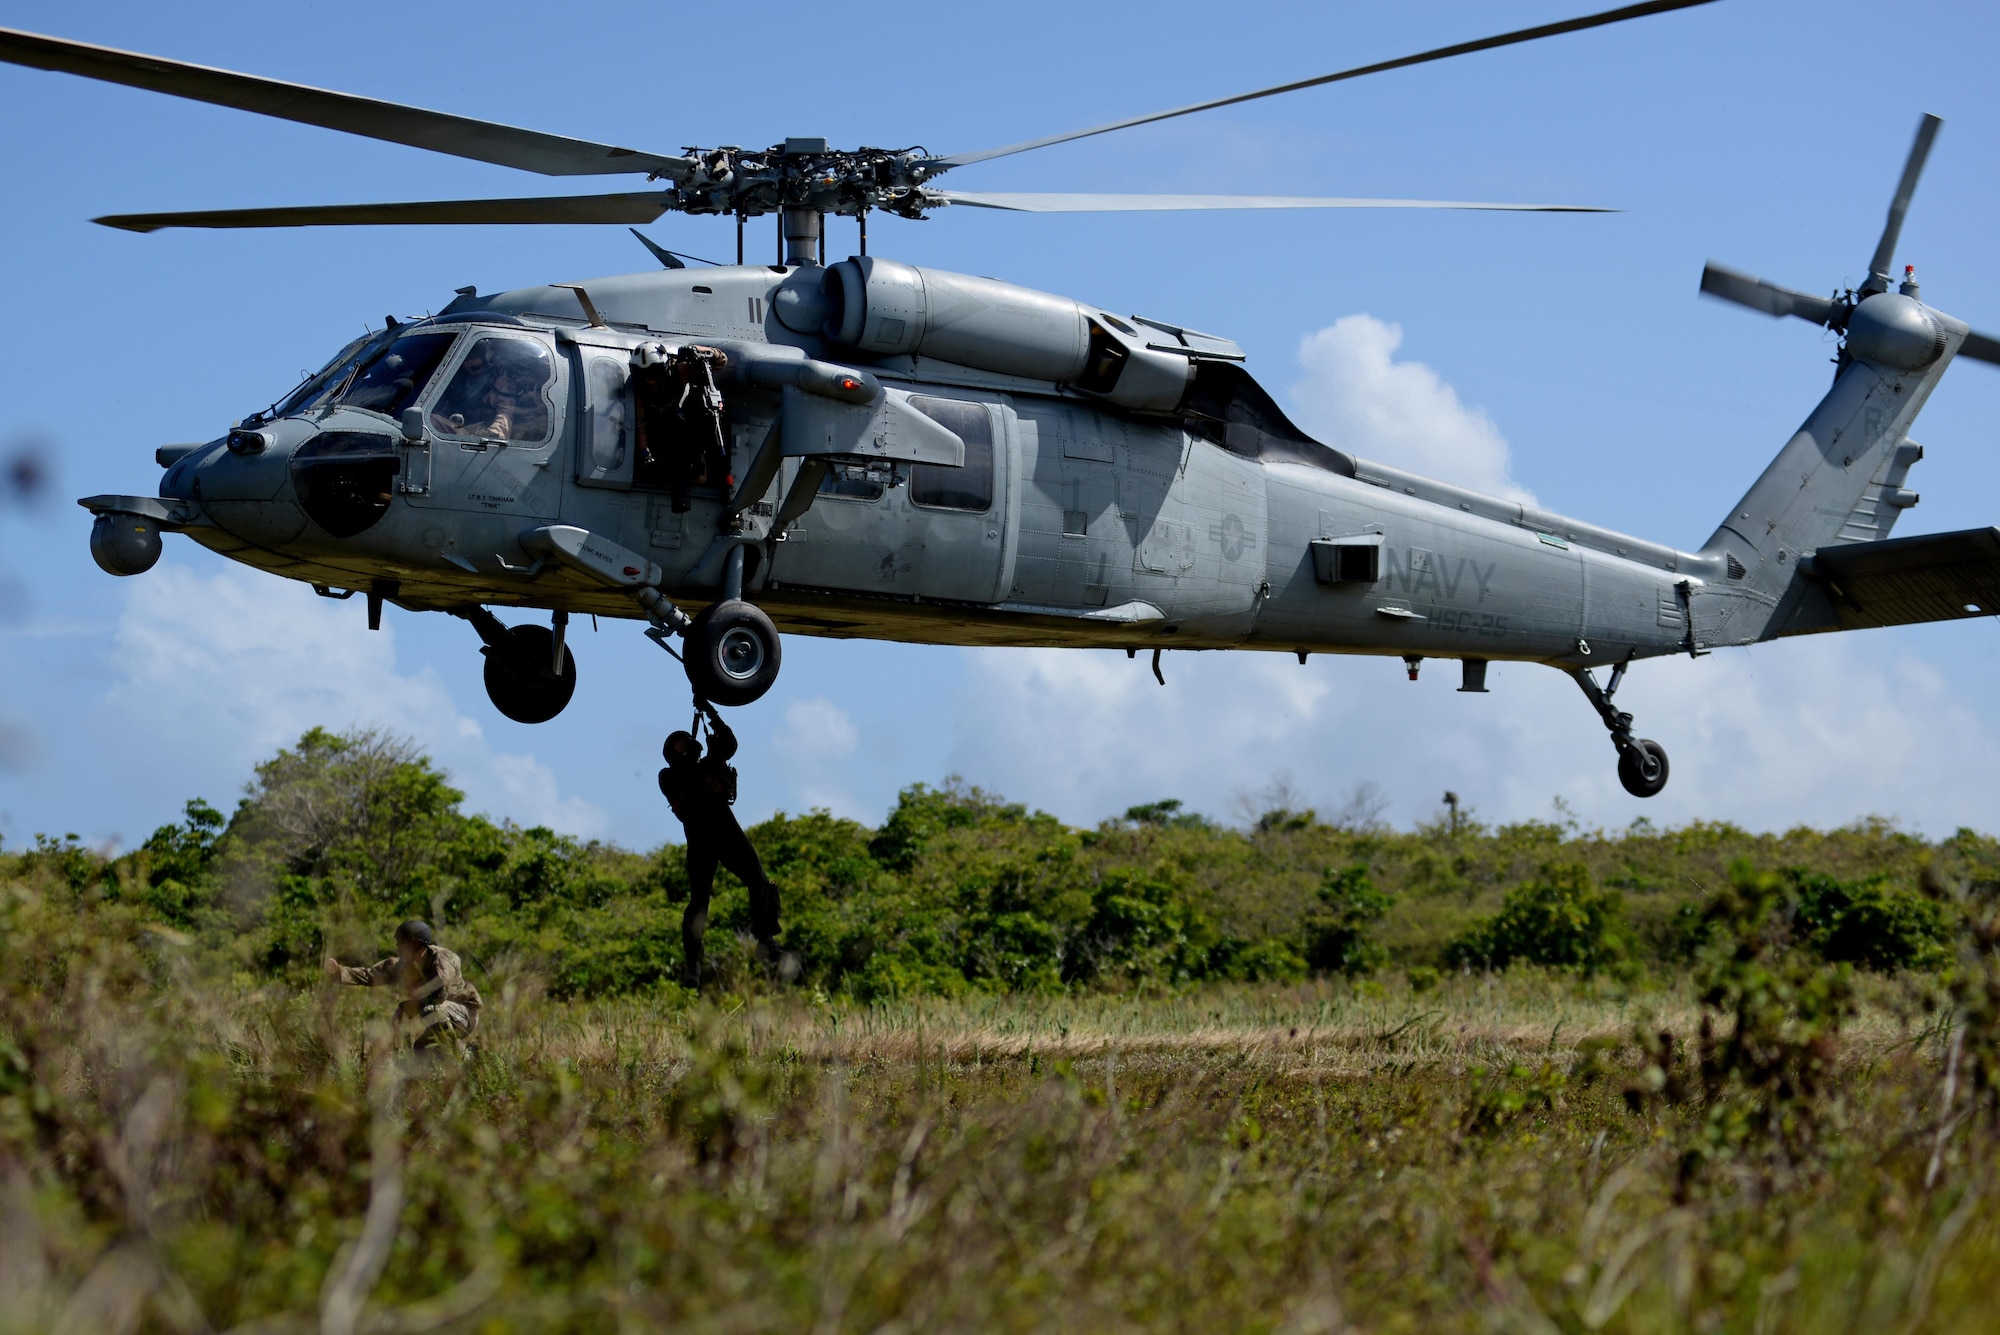 A U.S. Airman from the 9th Expeditionary Bomb Squadron descends from a U.S. Navy MH-60 Seahawk, assigned to Helicopter Sea Combat Squadron Two-Five, during a combat search and rescue training exercise June 5, 2017, at Andersen South, Guam. Service members from Task Force Talon, HSC-25, and the 36th Wing joined together to practice survival, evasion, resistance and escape procedures, emergency evacuation techniques and quick reaction force training. This is the first time these units participated in a combat search and rescue exercise together on Guam.(U.S. Air Force photo by Airman 1st Class Gerald R. Willis)
